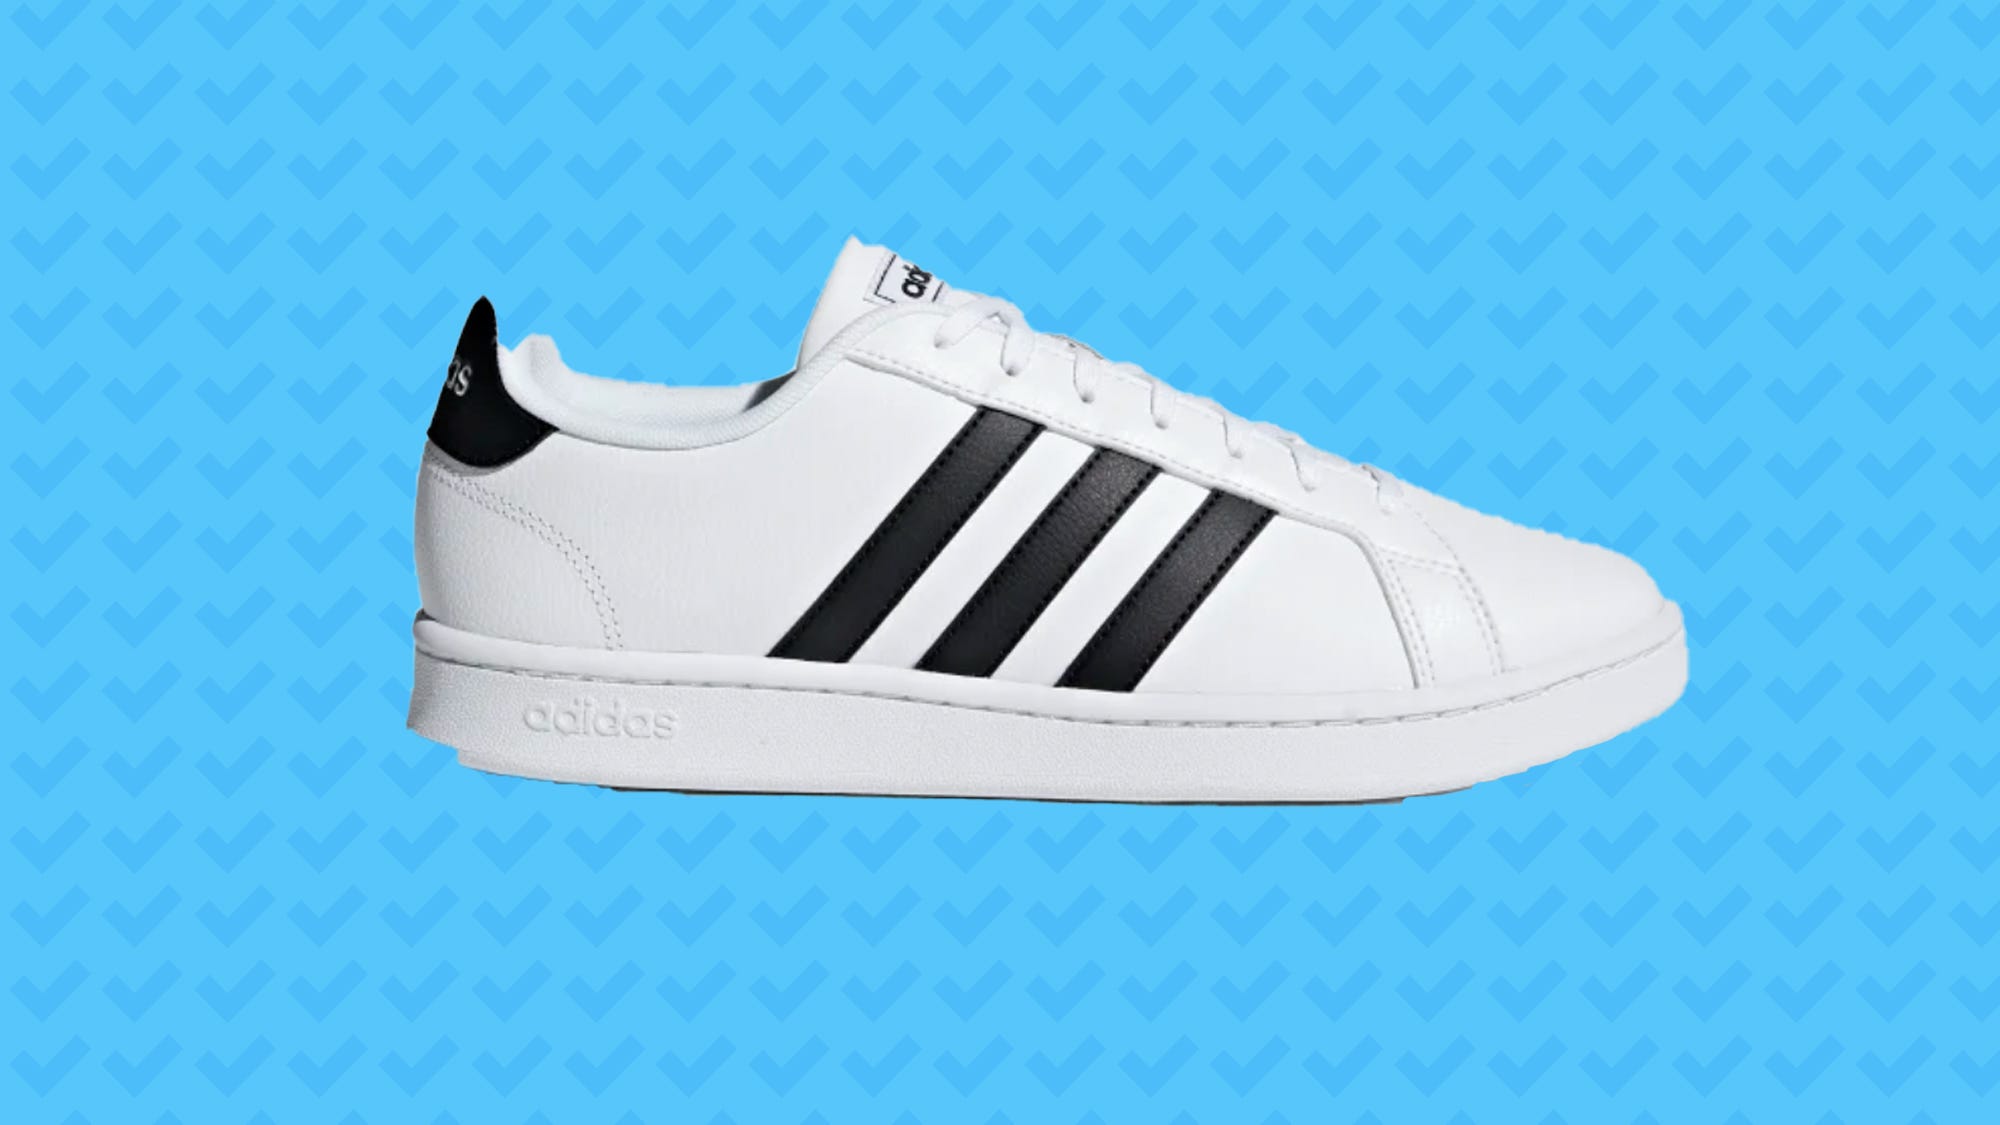 Adidas shoes: Snag discounted styles 